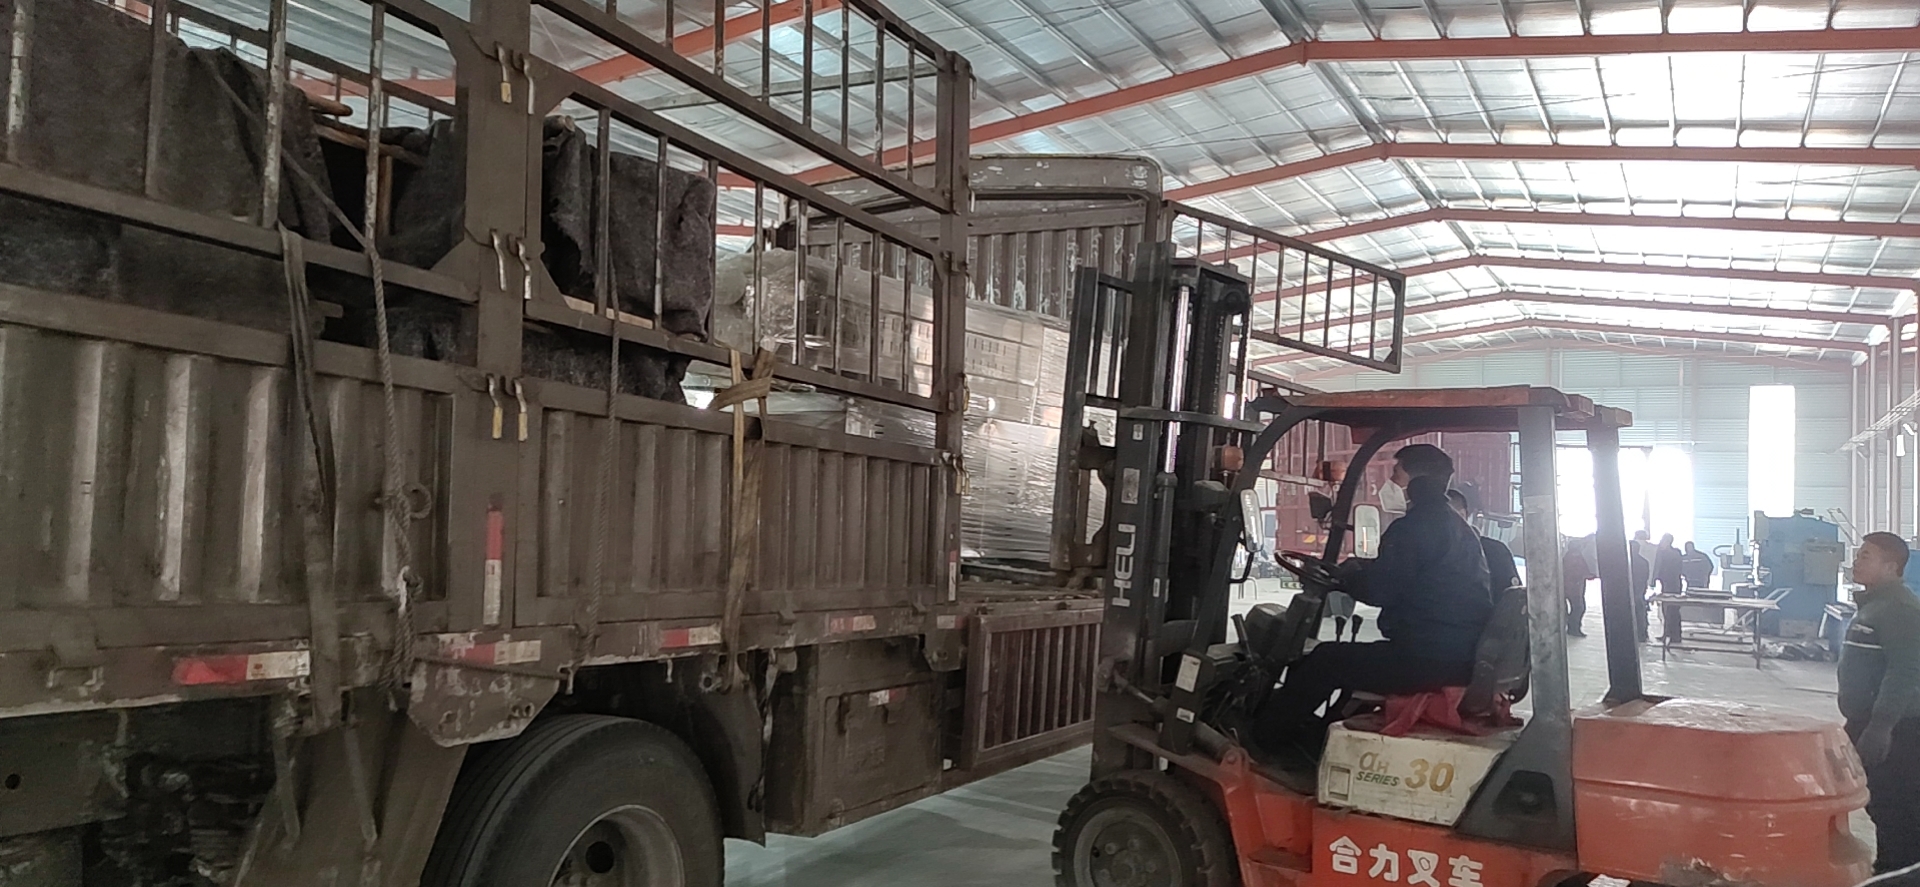 200kgs per hour capacity of puffed corn powder production line loading for client in FuShun City, China